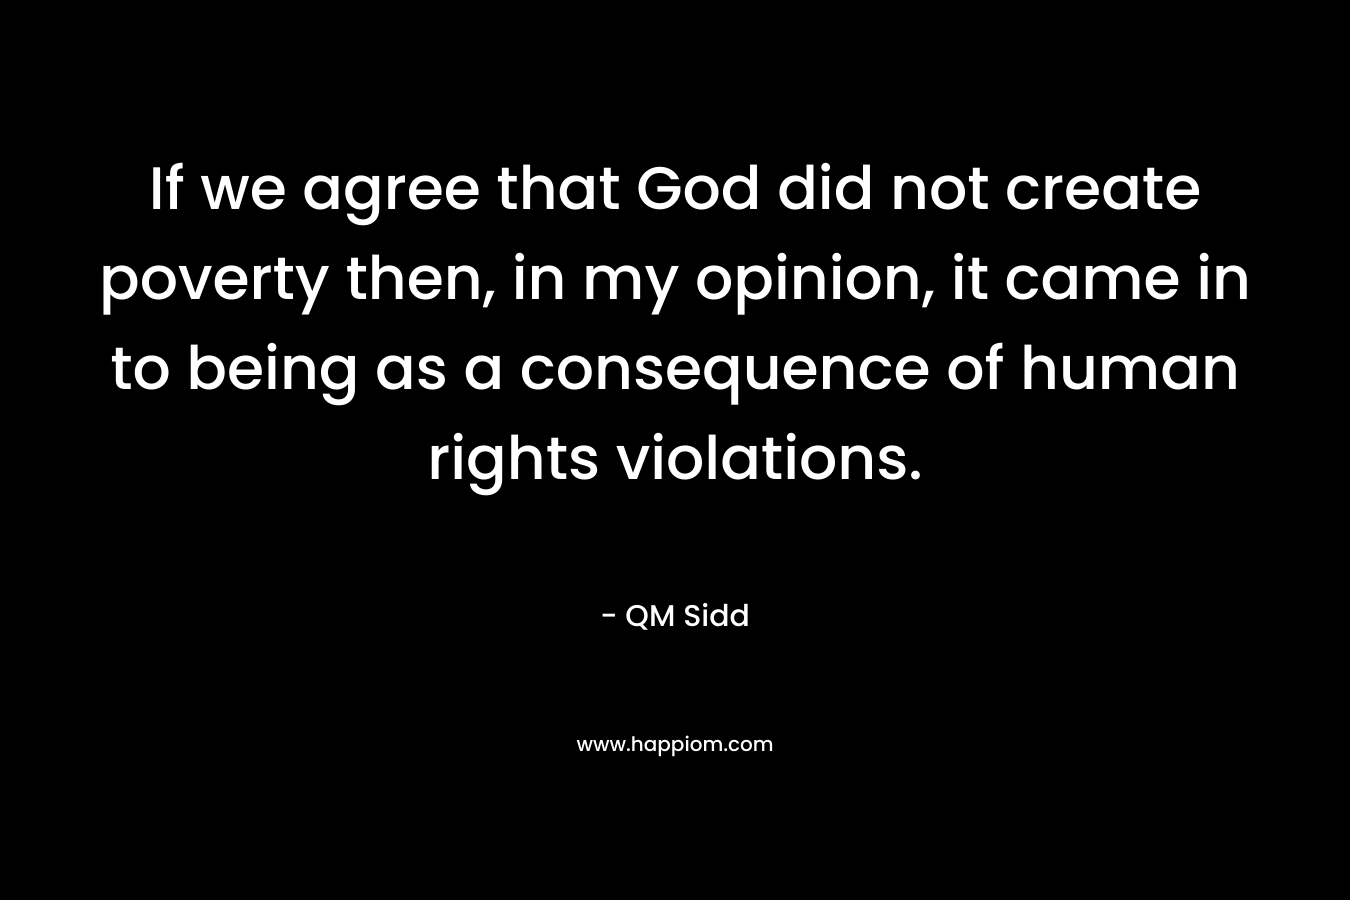 If we agree that God did not create poverty then, in my opinion, it came in to being as a consequence of human rights violations. – QM Sidd